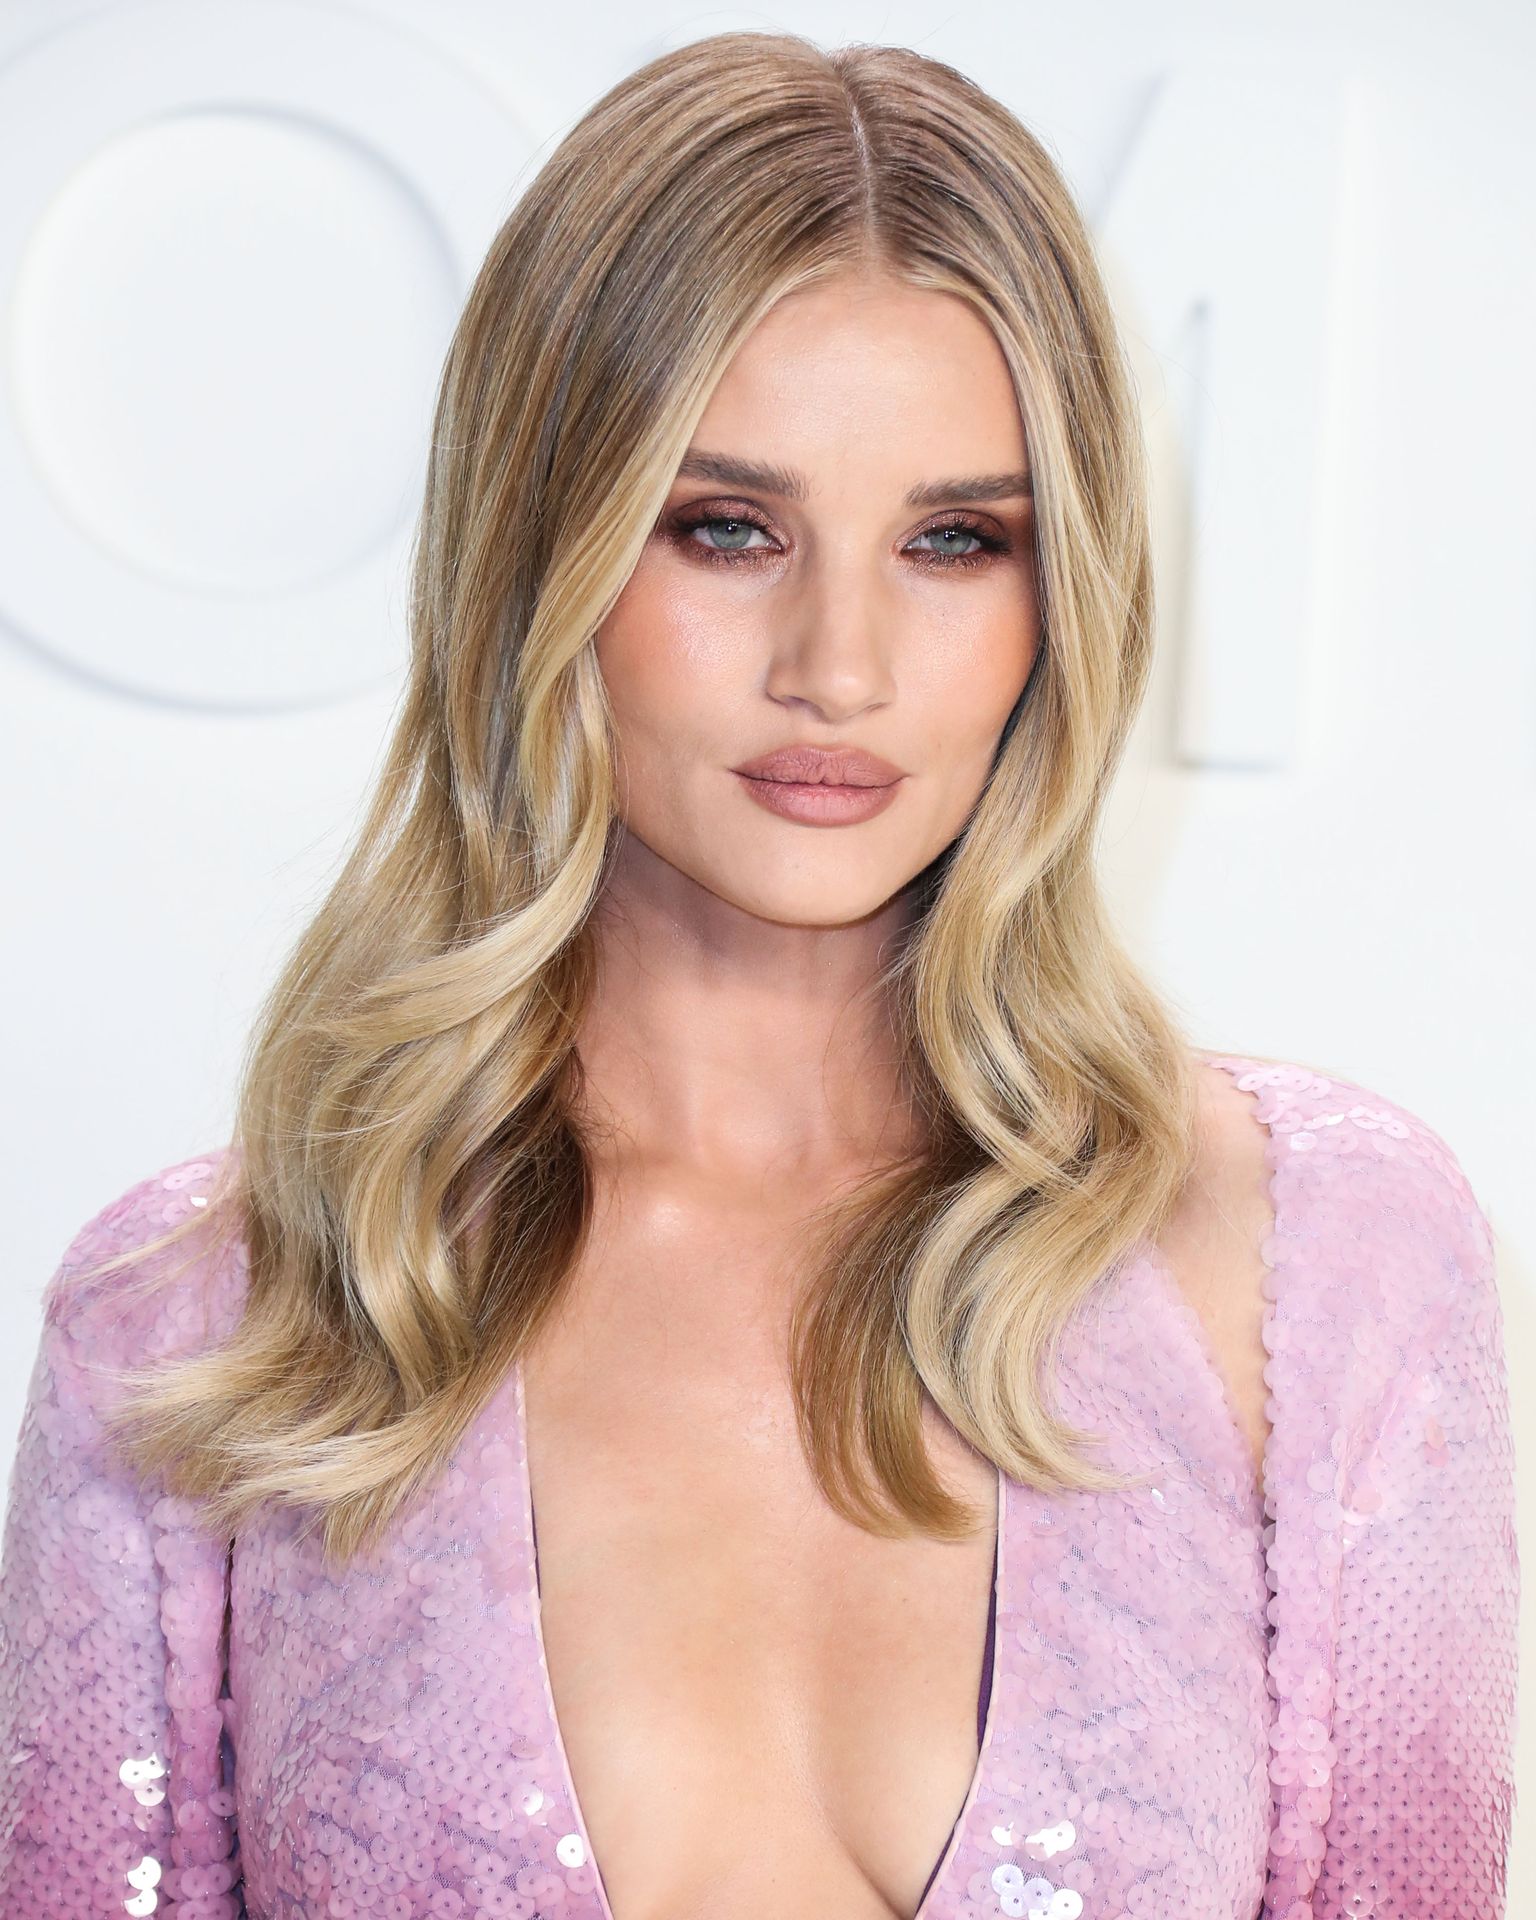 Rosie Huntington-Whiteley Shows Her Cleavage at the Tom Ford Fashion Show (115 Photos)